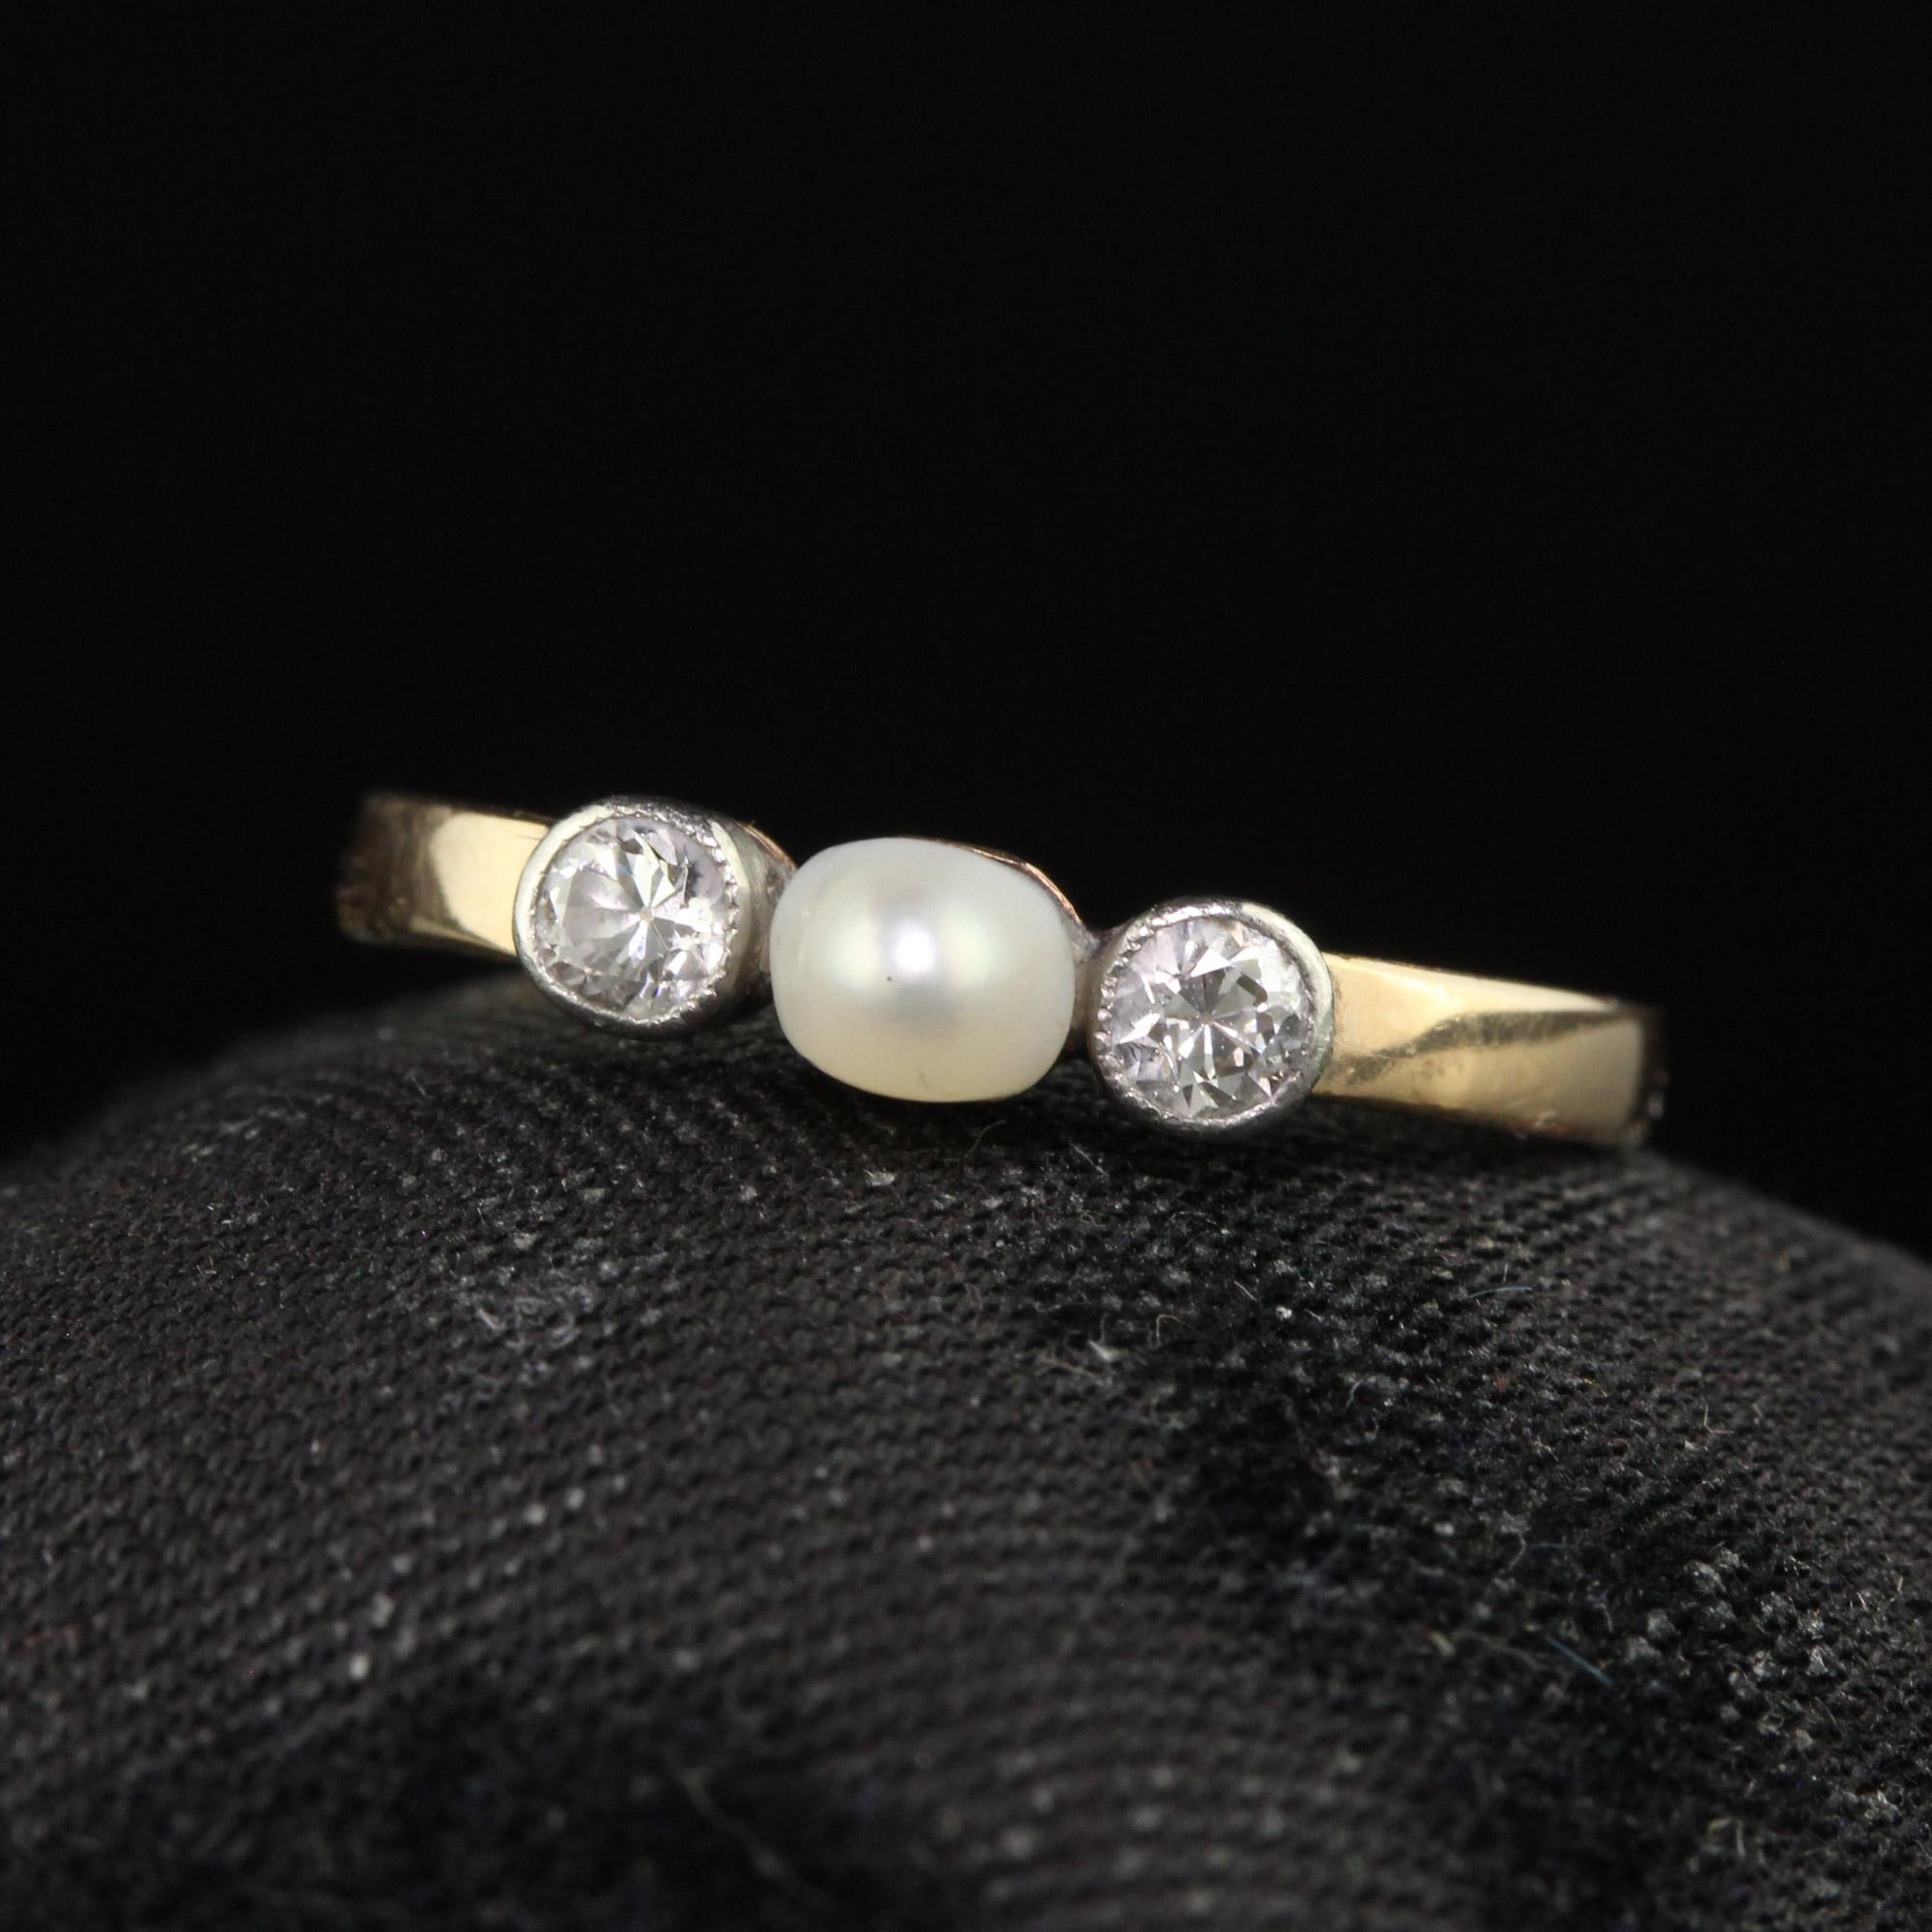 Beautiful Antique Art Deco 14K Yellow Gold Old Euro Diamond and Pearl Three Stone Ring. This beautiful ring is crafted in 14k yellow gold. There is a natural pearl in the center that has two beautiful old cut diamonds on either side. The ring is in